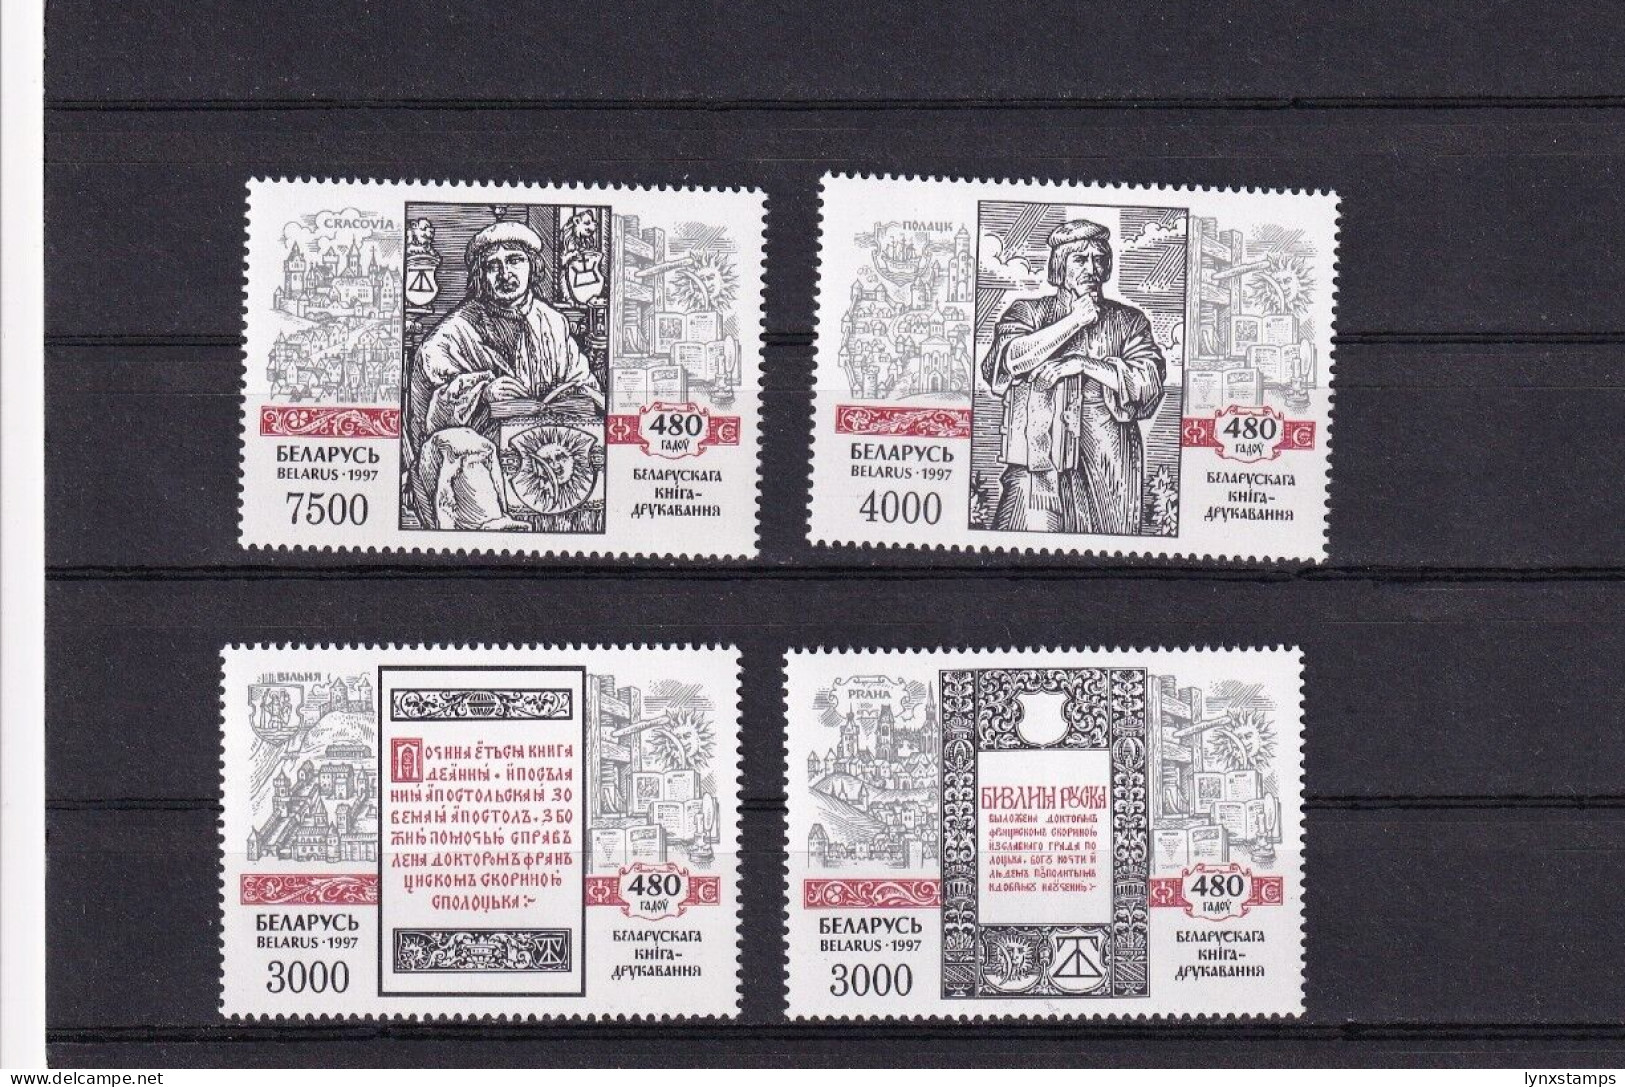 SA06 Belarus 1997 The 480th Anniversary Of Belarussian Bookprinting Mint Stamps - Belarus